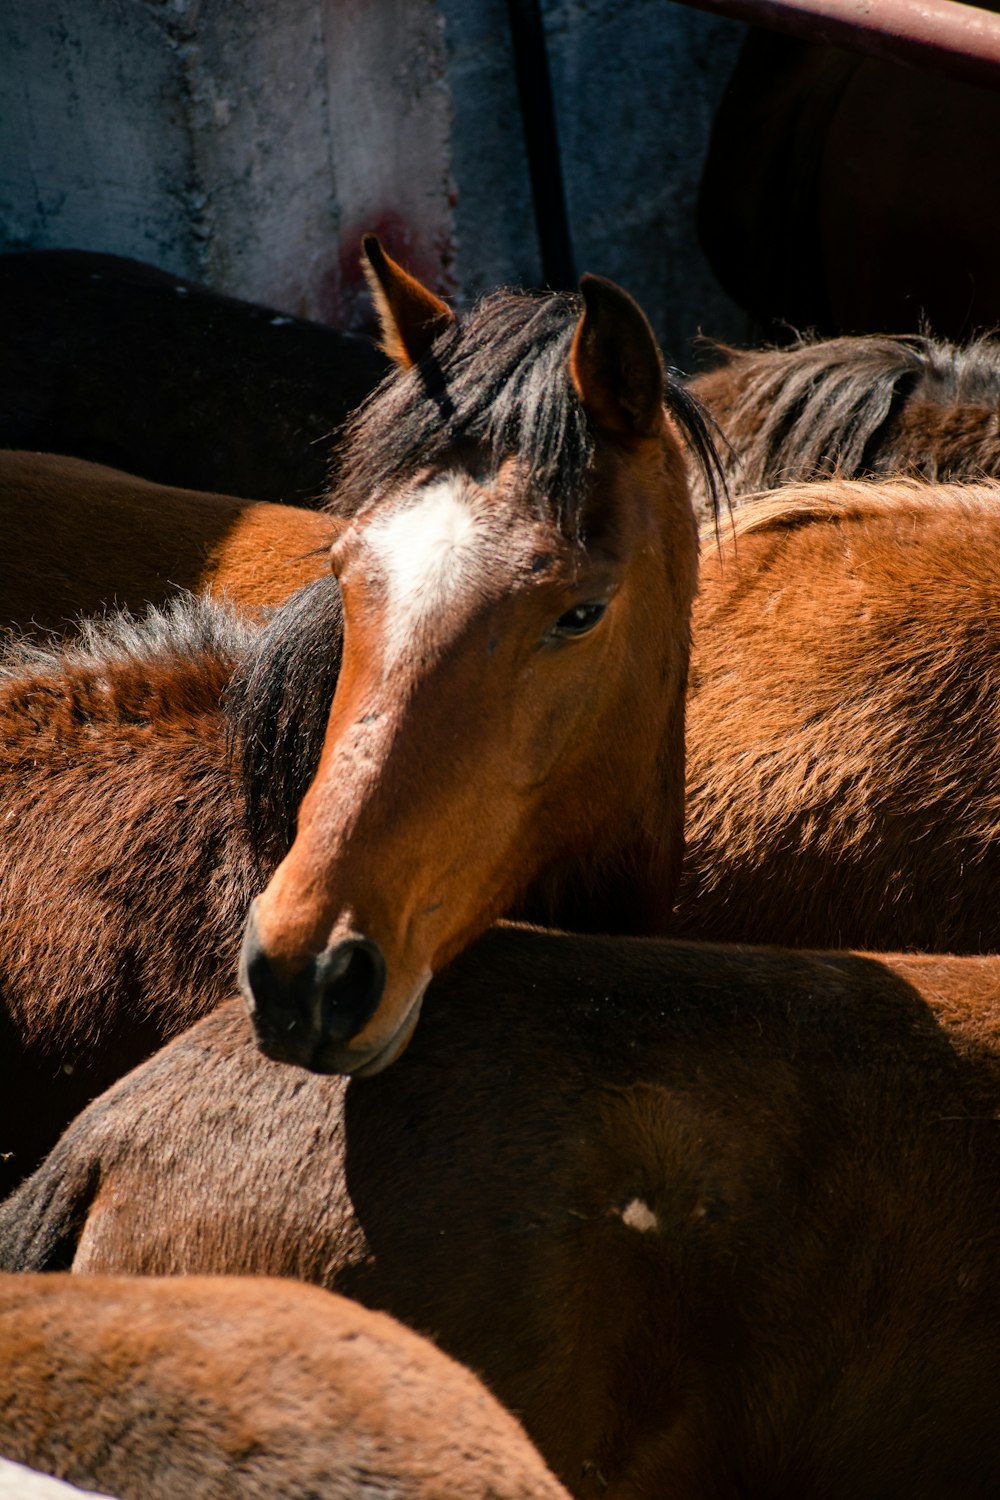 a group of brown horses standing next to each other